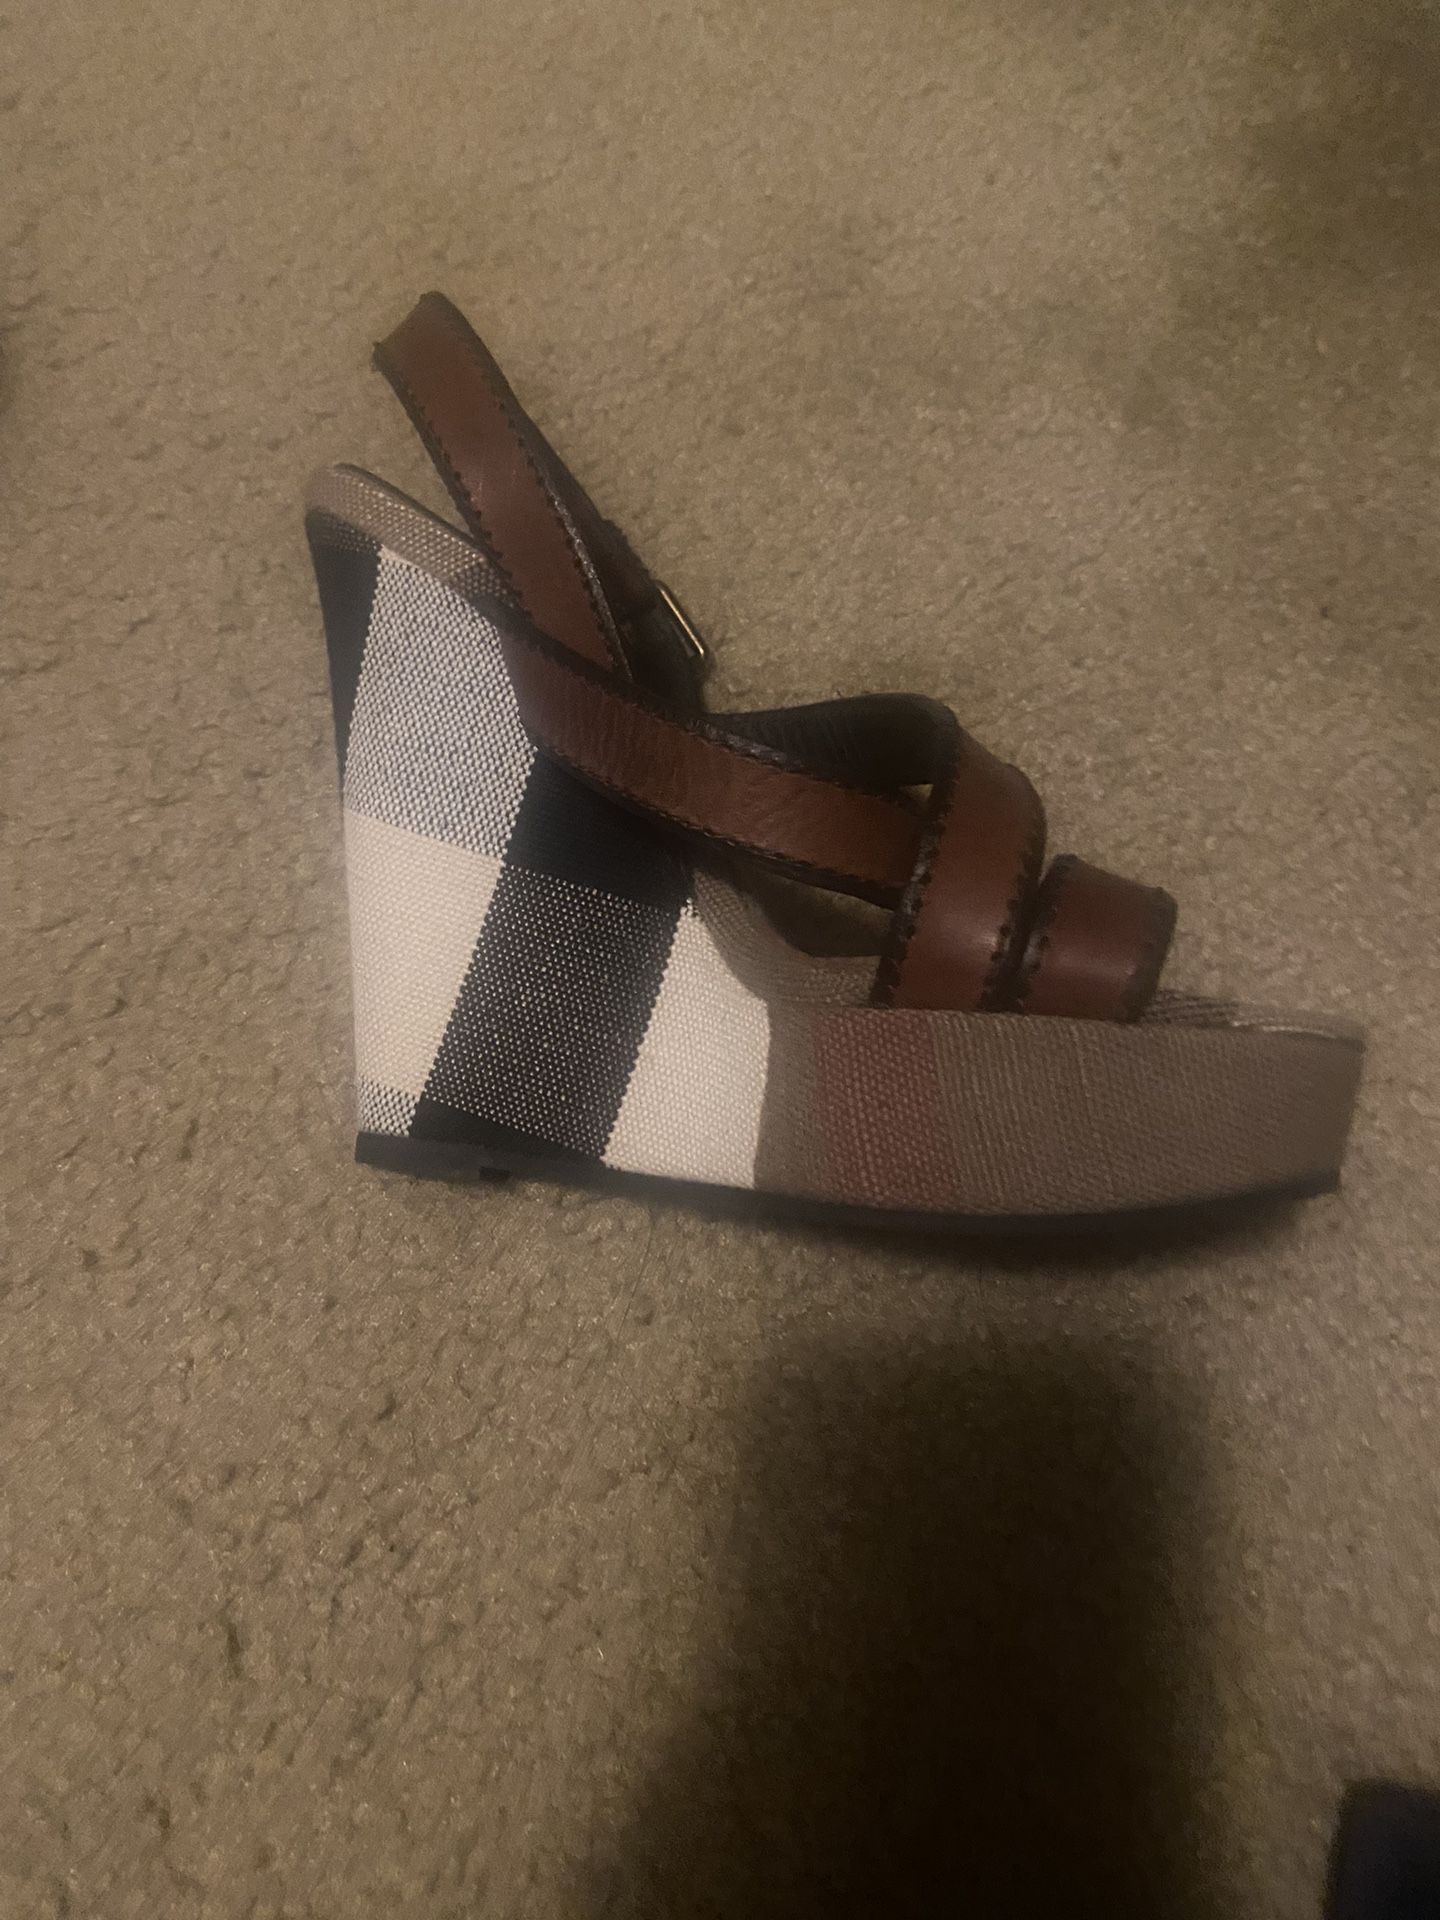 Burberry Shoes Size 8